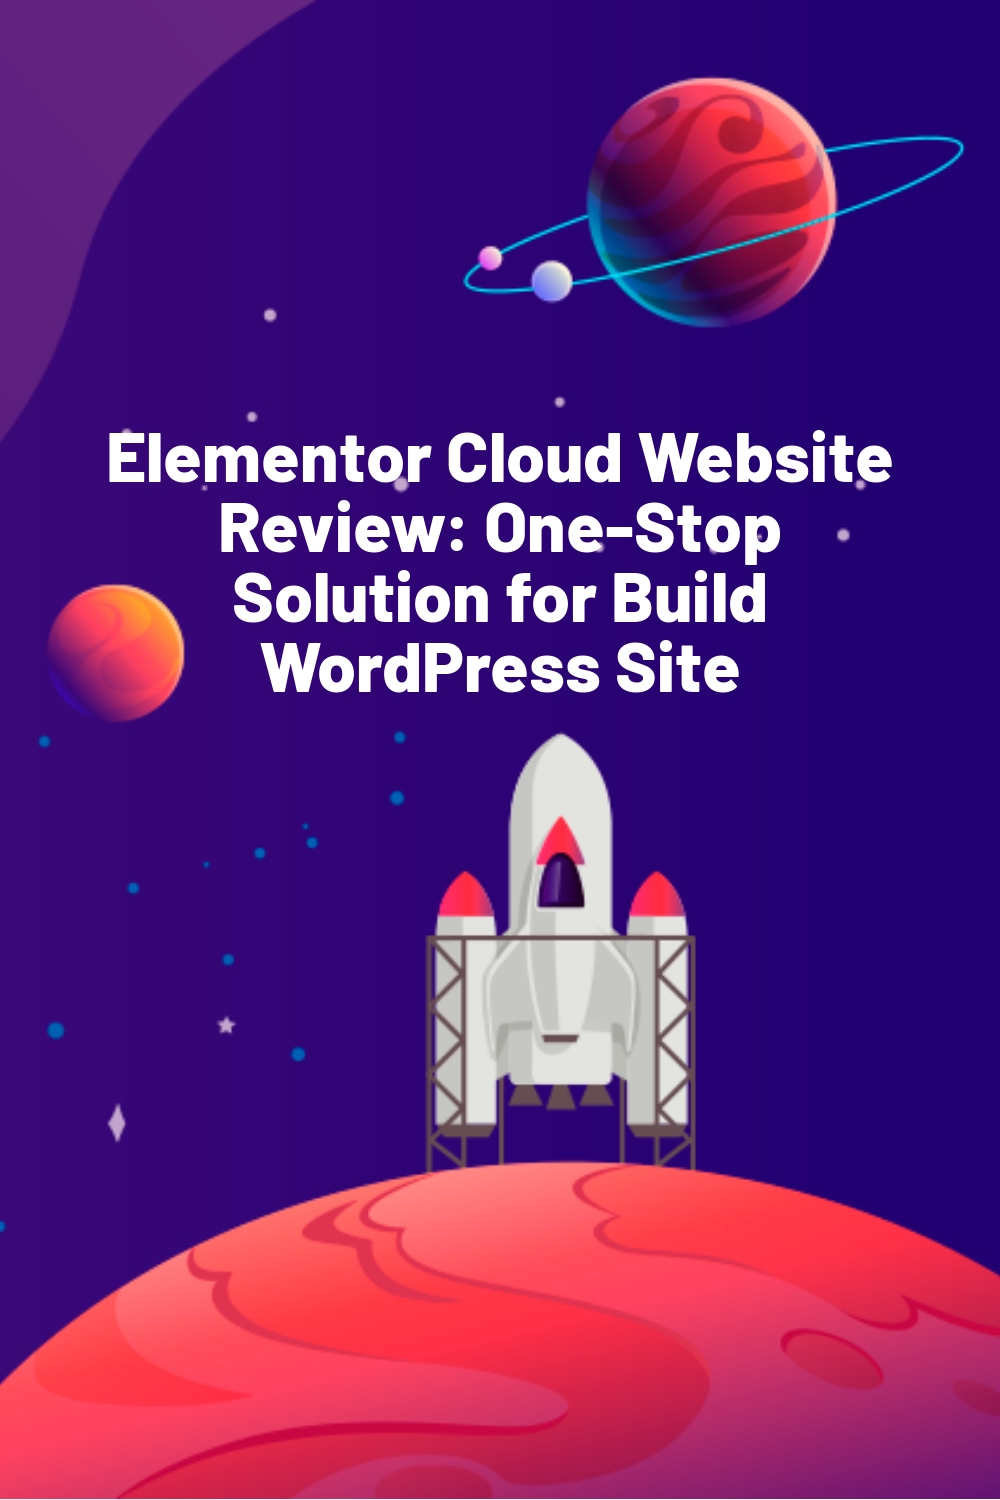 Elementor Cloud Website Review: One-Stop Solution for Build WordPress Site